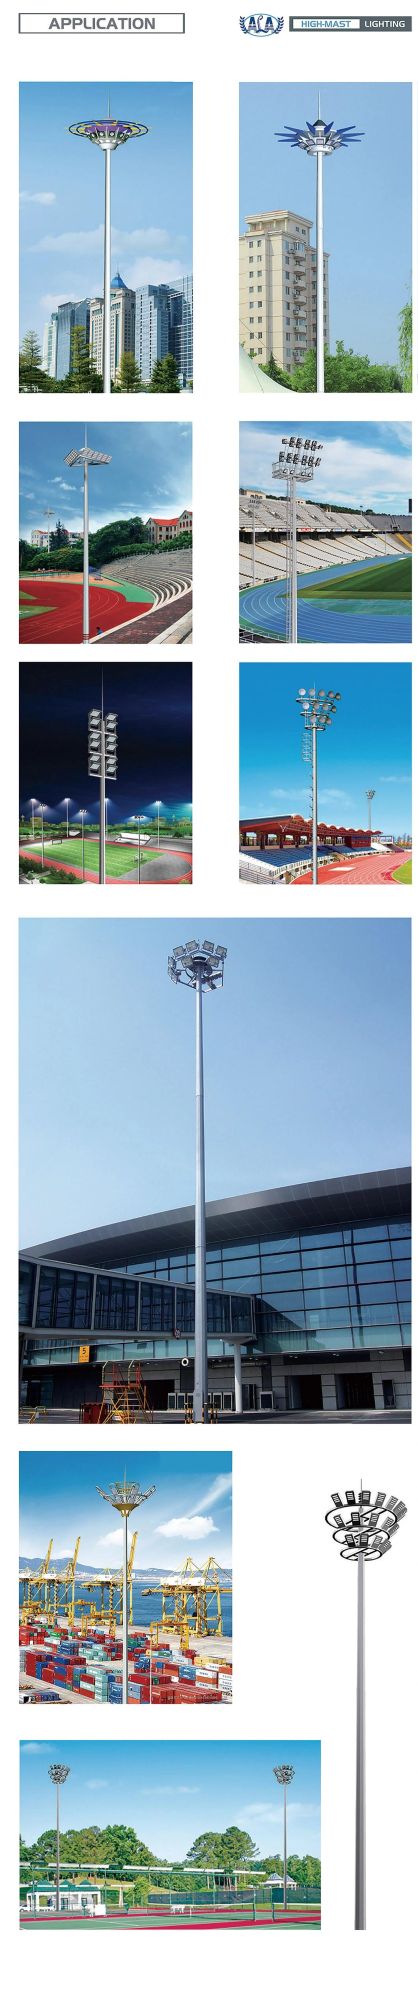 Ala 300W Airport Stadium High Mast Lamp with Raising and Lowering Device